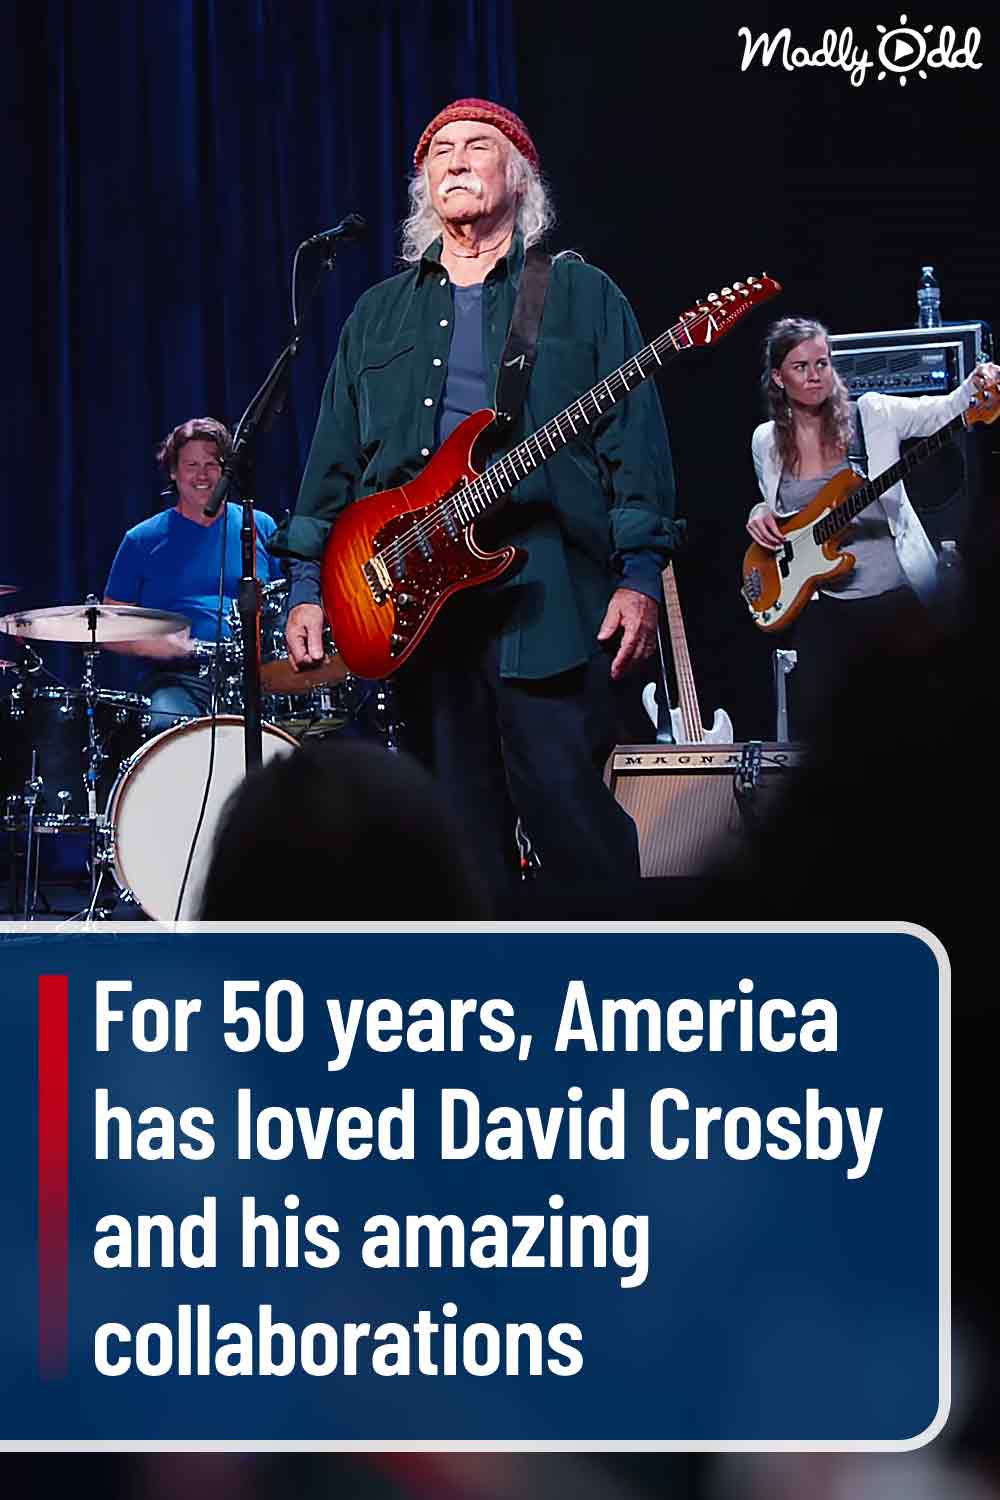 For 50 years, America has loved David Crosby and his amazing collaborations